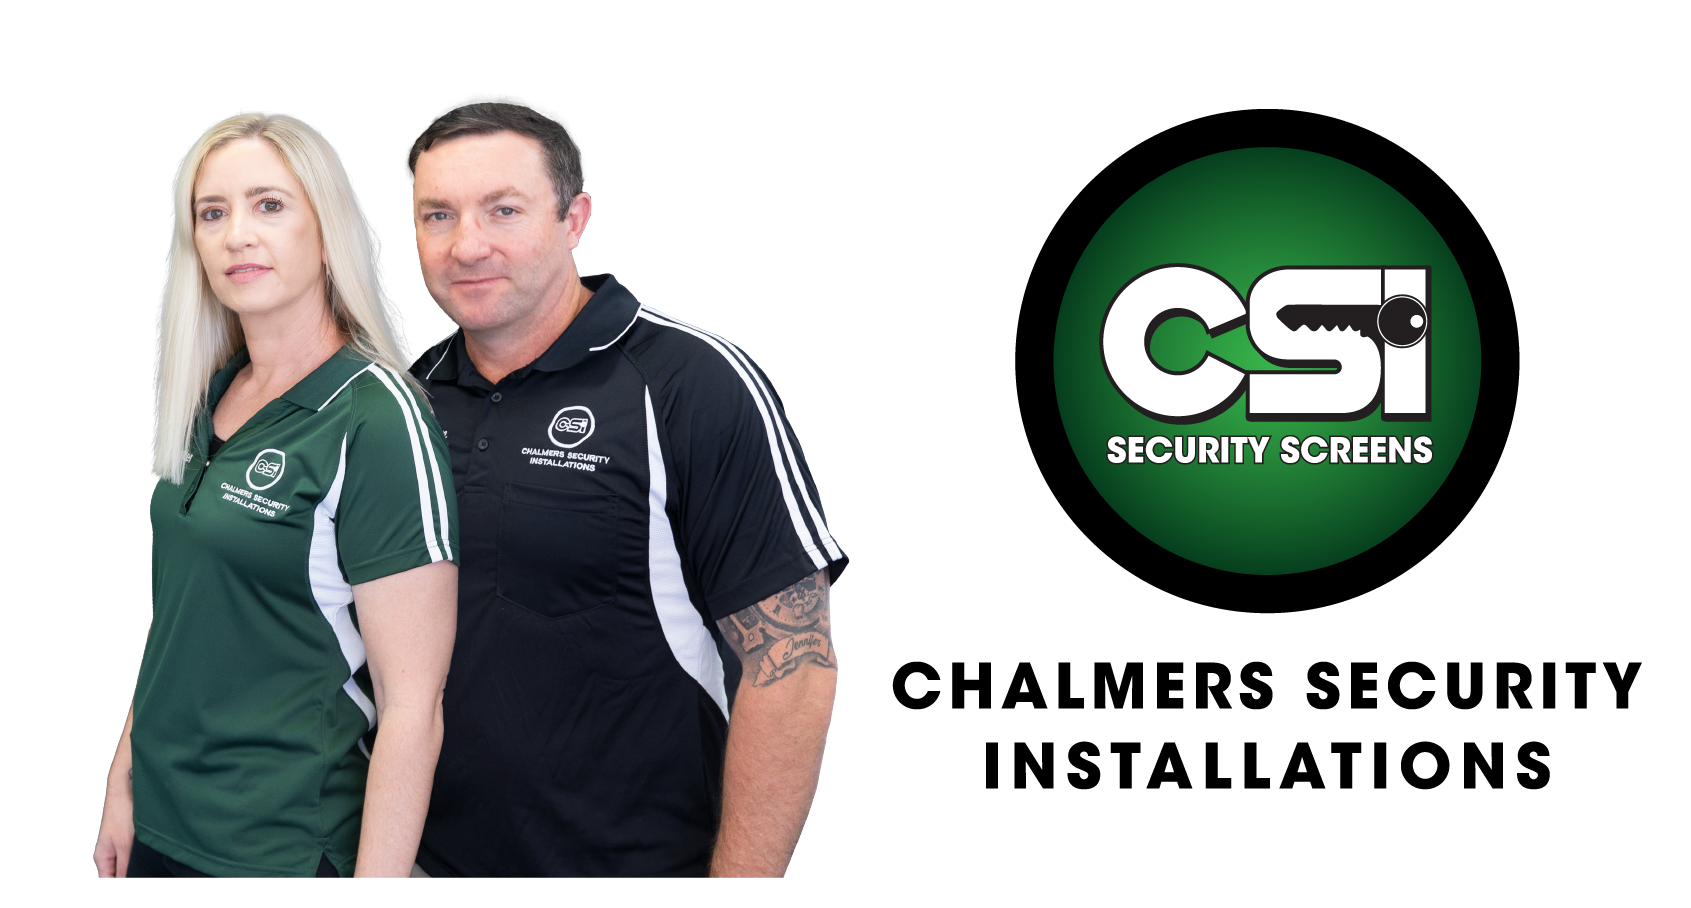 Stephen and Jennifer CSI Security Installations Prowler Proof Installer Springfield